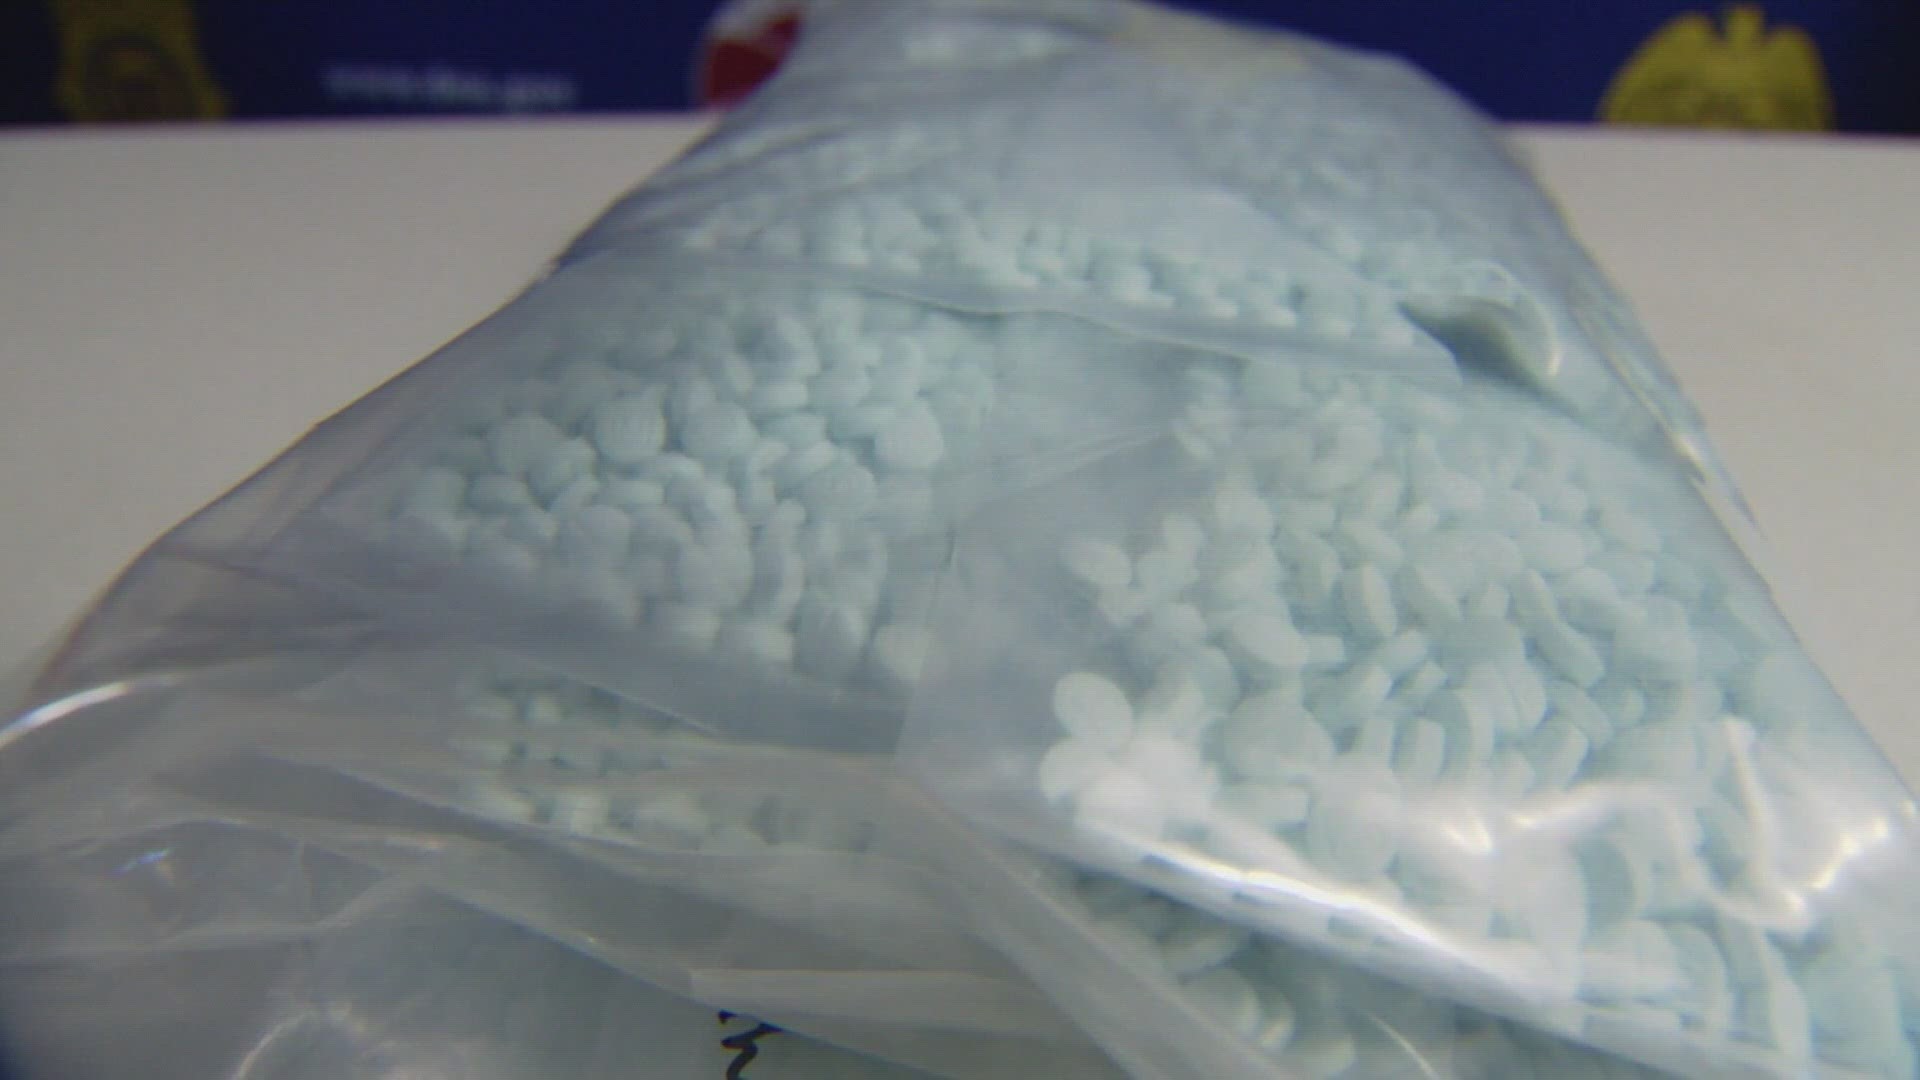 Teenagers are selling drugs laced with fentanyl to their peers. The pressure teens face and the presence of social media are feeding fentanyl's deadly nature.